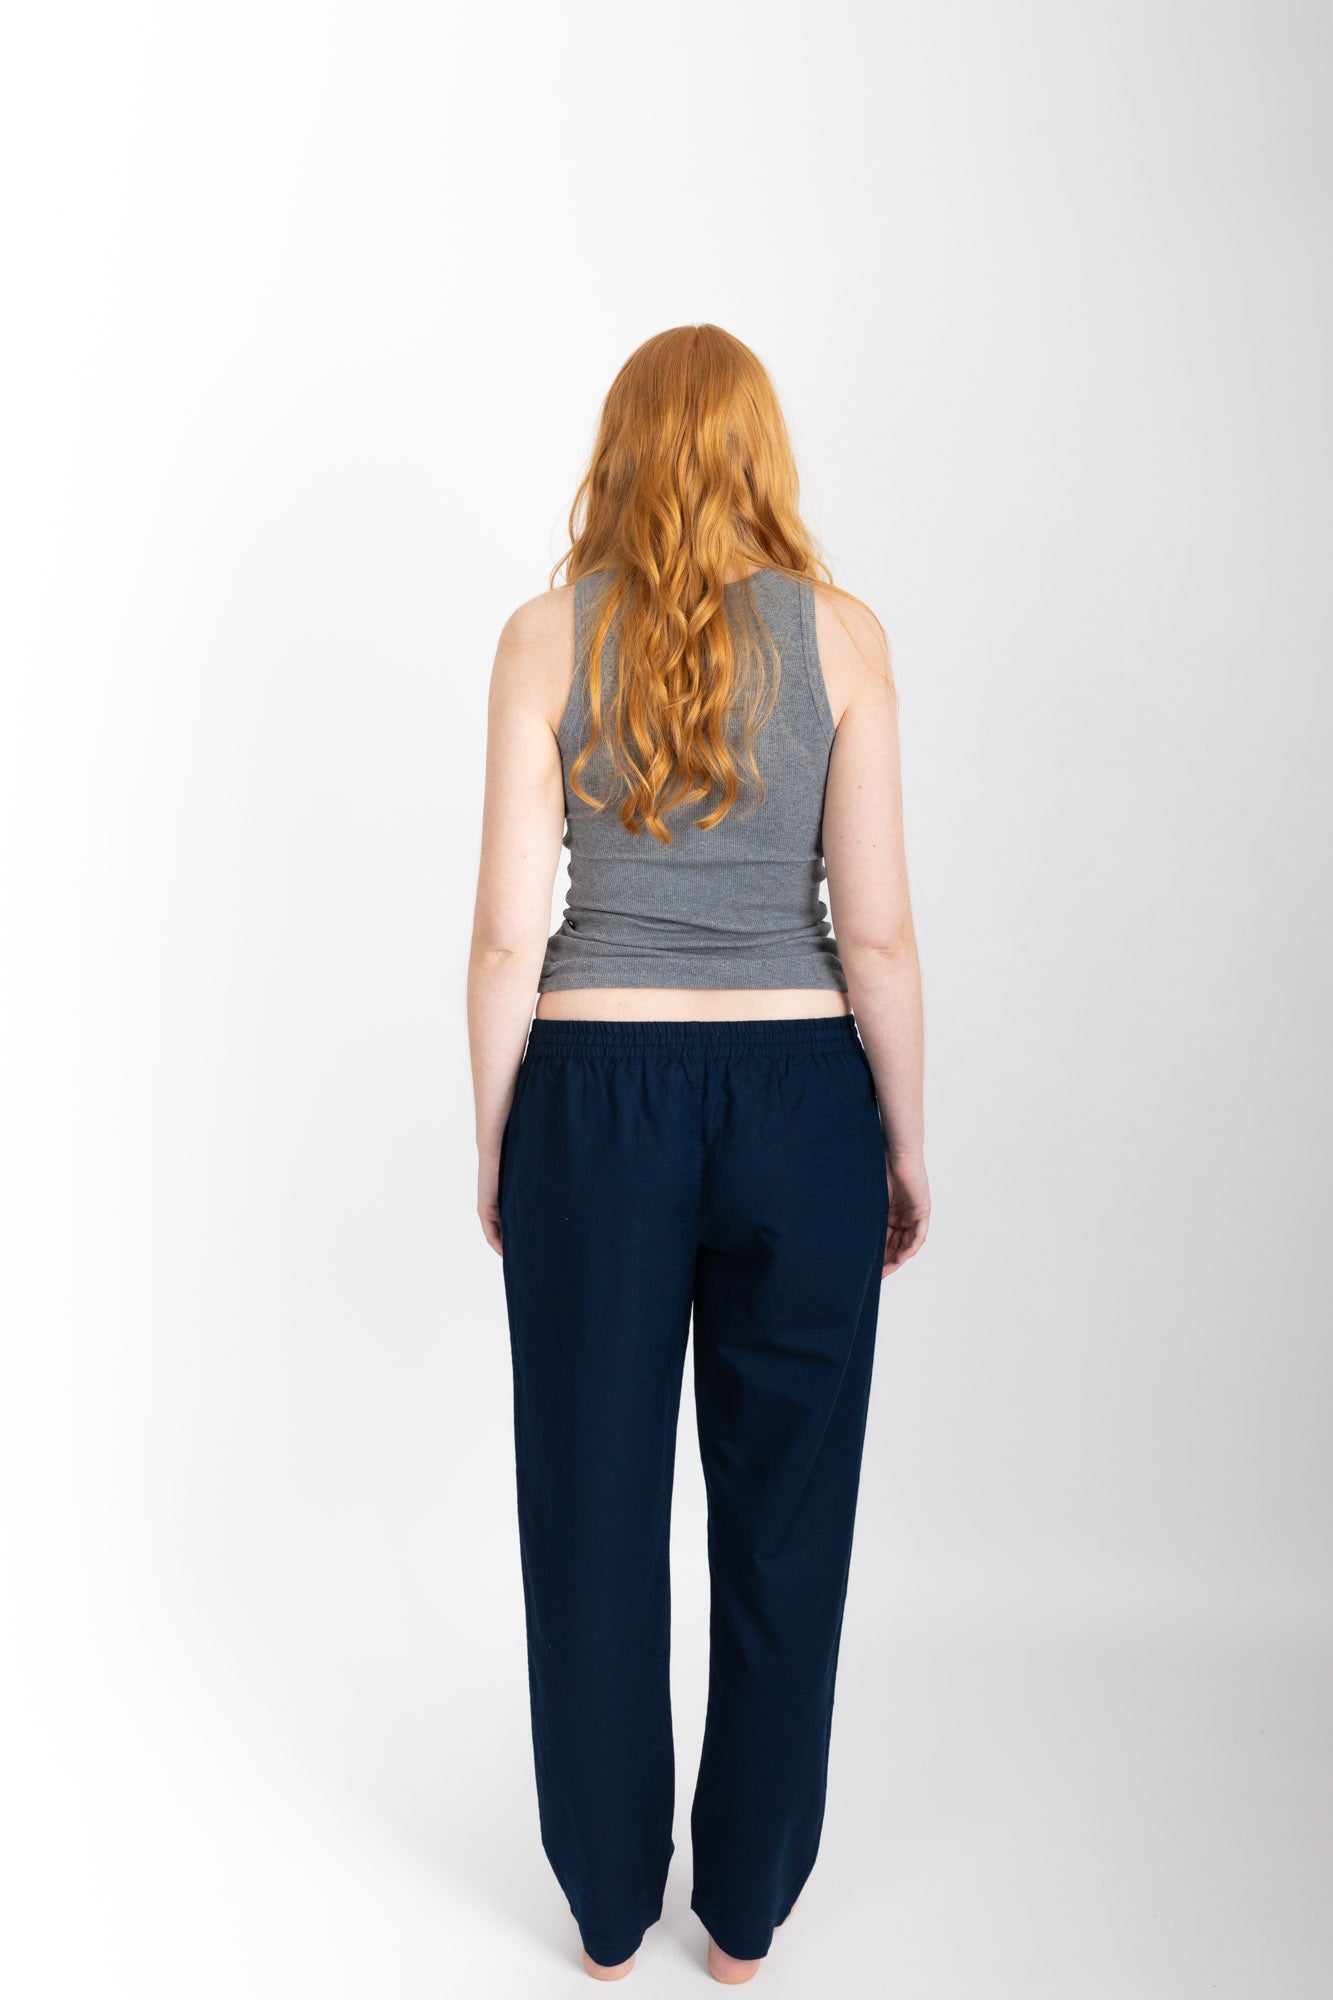 Women’s pyjama pant.  Made from an organic cotton and linen blend, in Navy.  These pants feature an elasticated waistband with a drawstring for comfort.